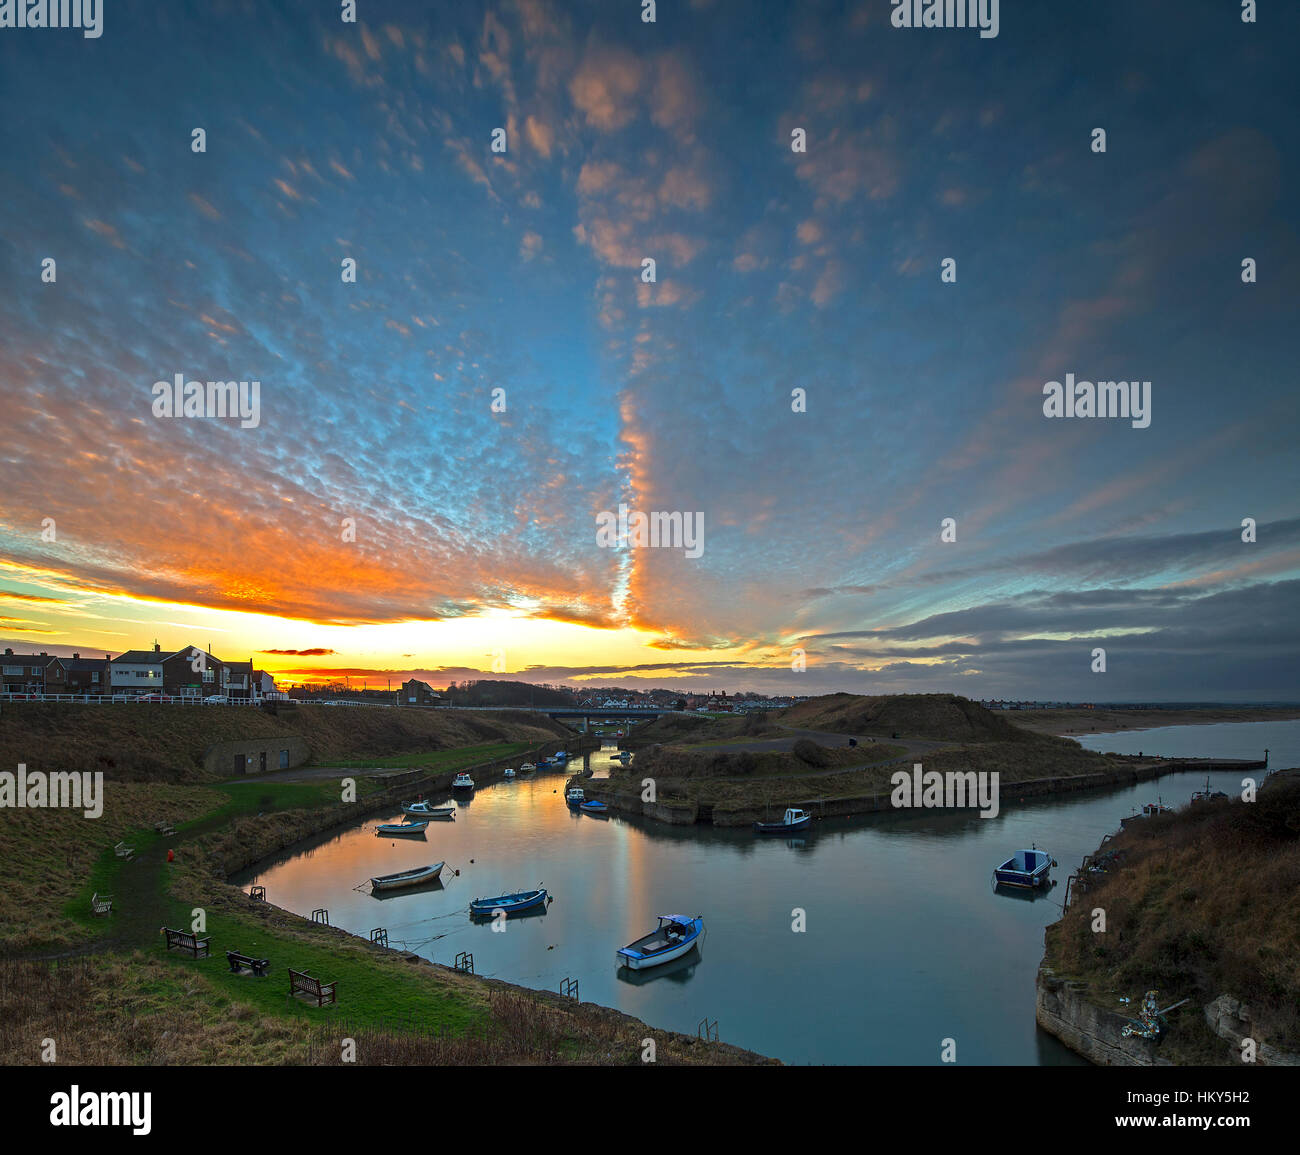 A vibrant sunset in winter over Seaton Sluice harbour looking towards Blyth, Northumberland, England, United Kingdom Stock Photo